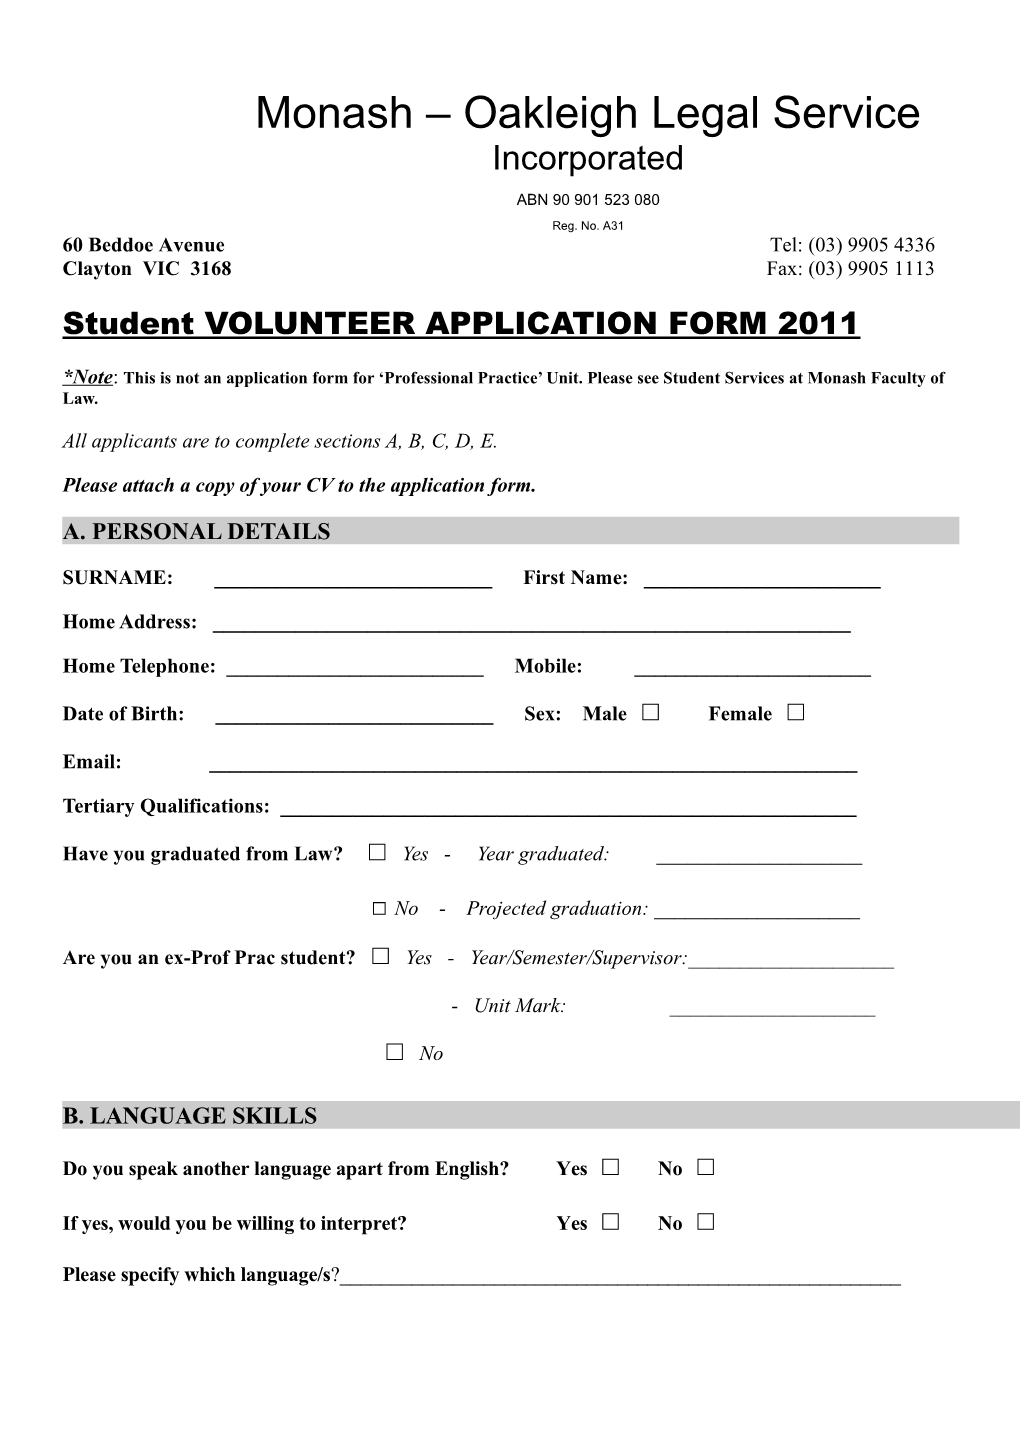 Please Attach a Copy of Your CV to the Application Form